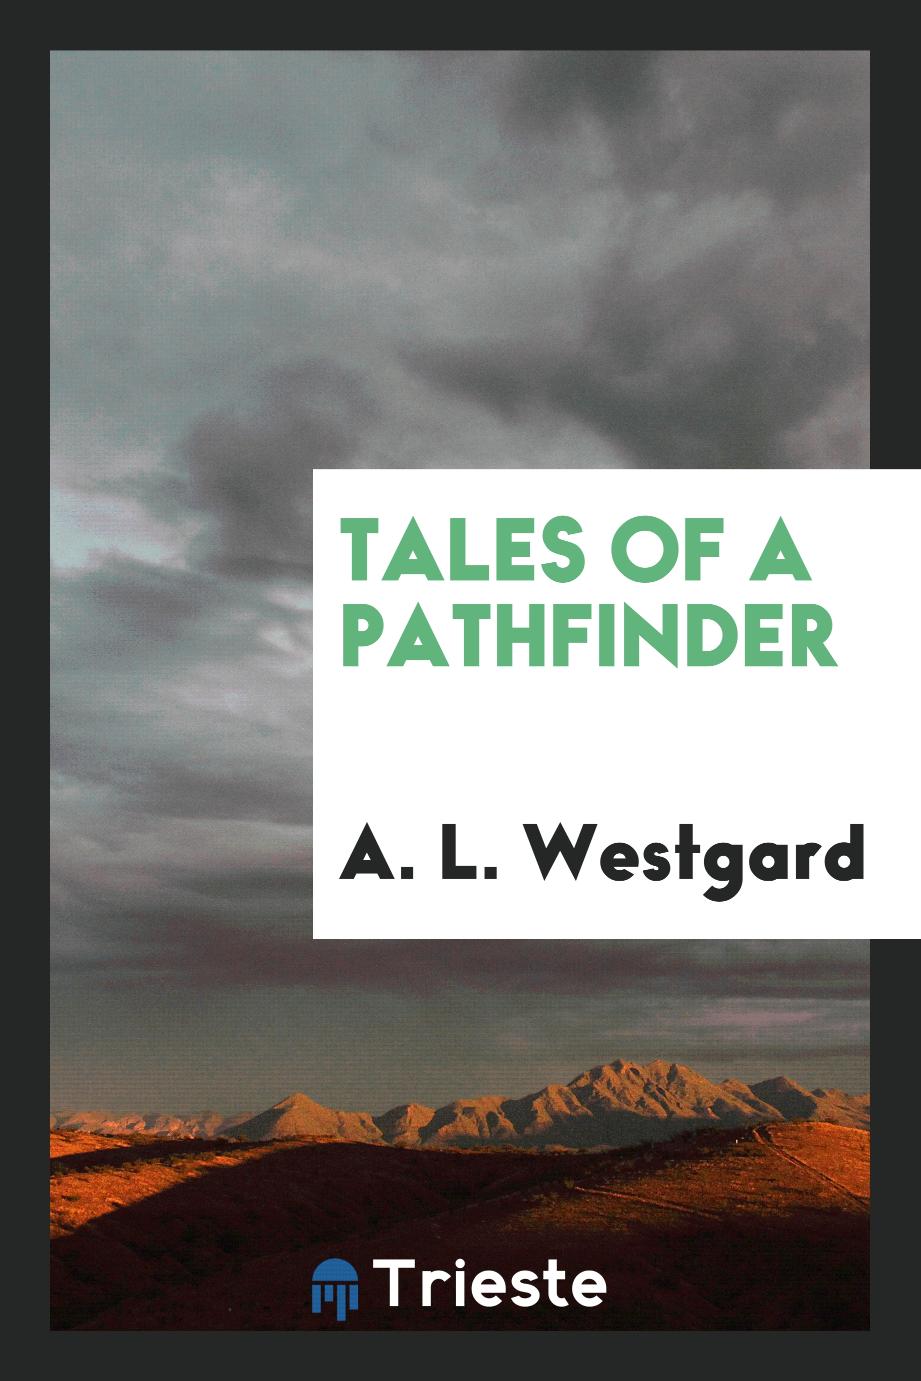 Tales of a pathfinder